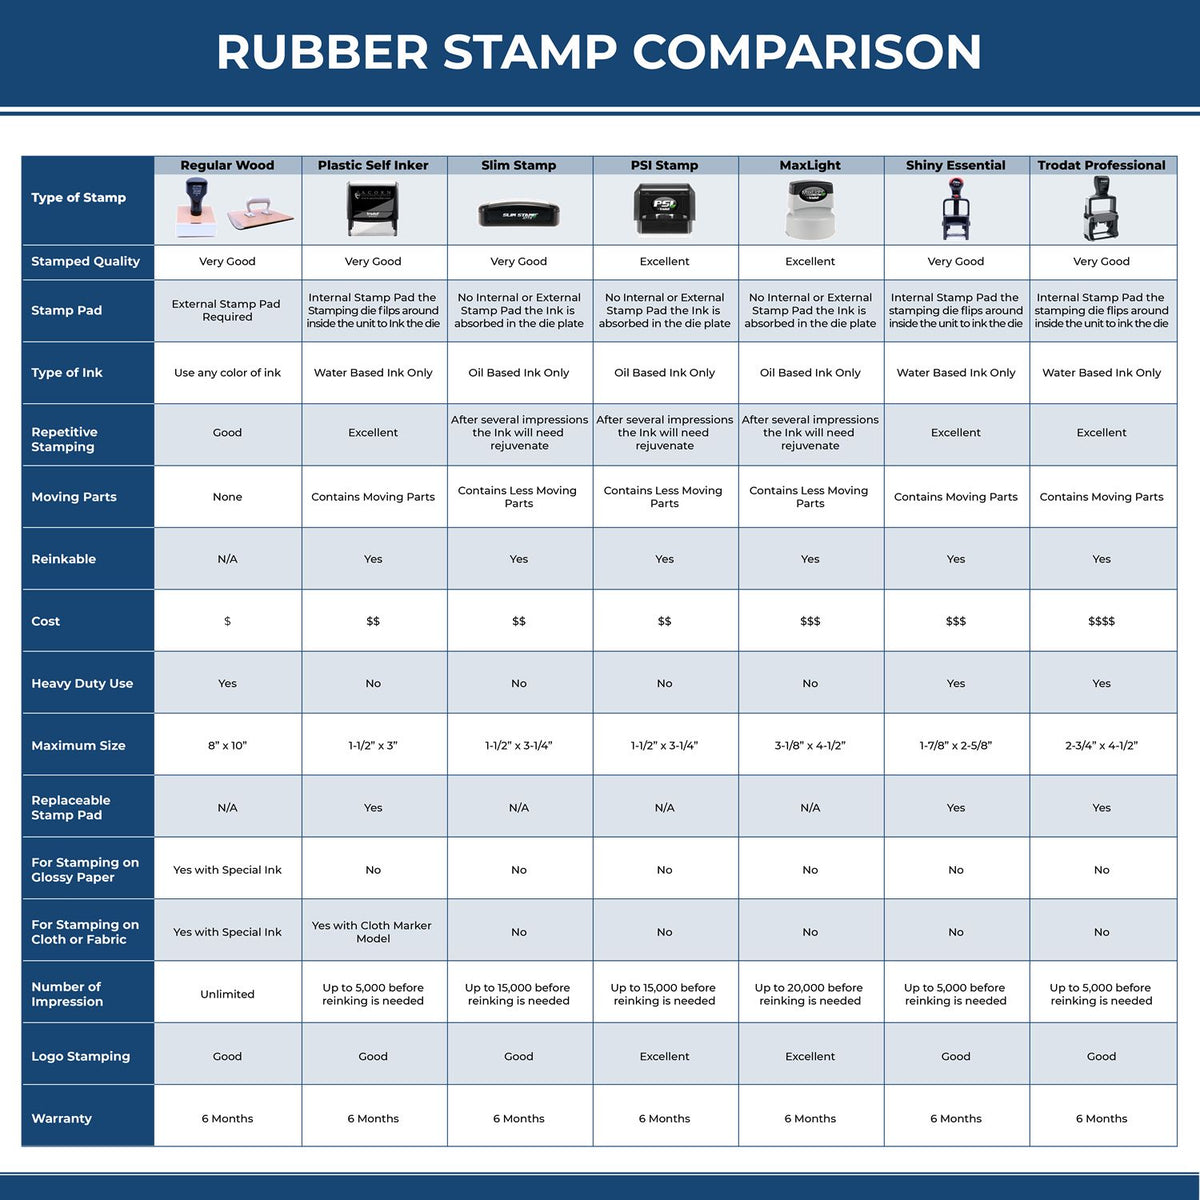 A comparison chart for the different types of mount models available for the Self-Inking Rectangular Washington Notary Stamp.